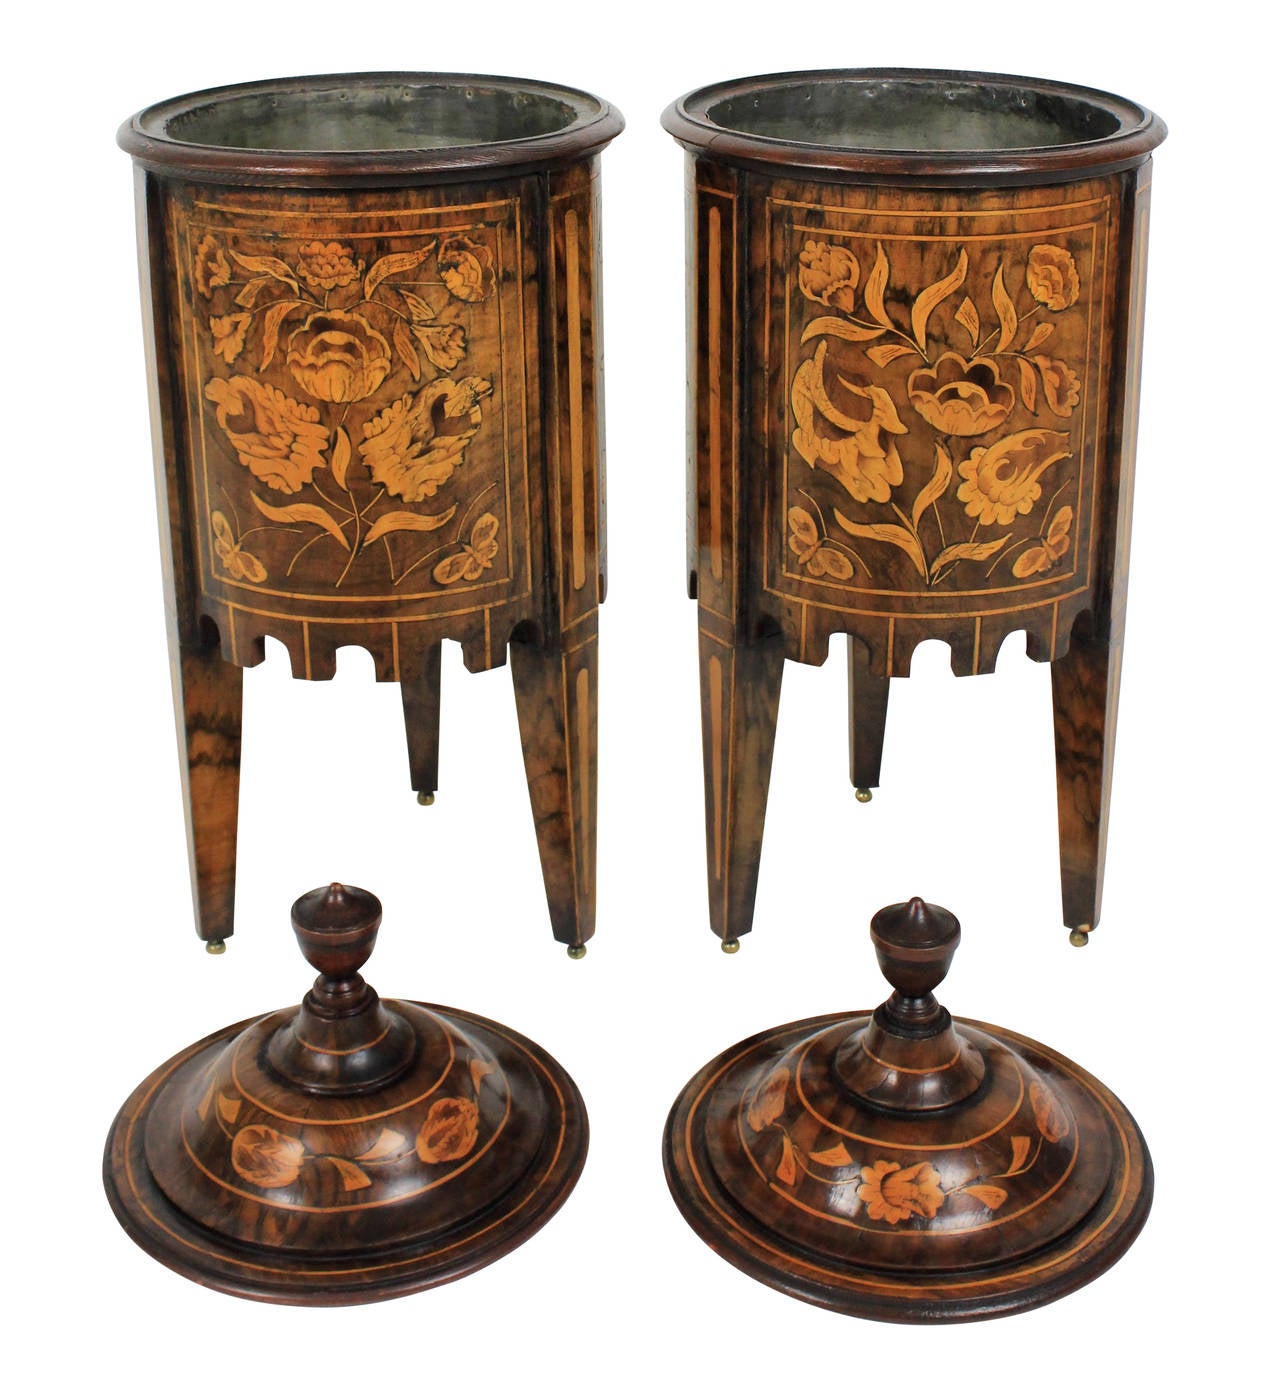 A pair of Dutch wine coolers of exquisite quality. inlaid depicting flowers and butterlies, in tulip wood and walnut. Lead lined, with covers and on brass ball feet.